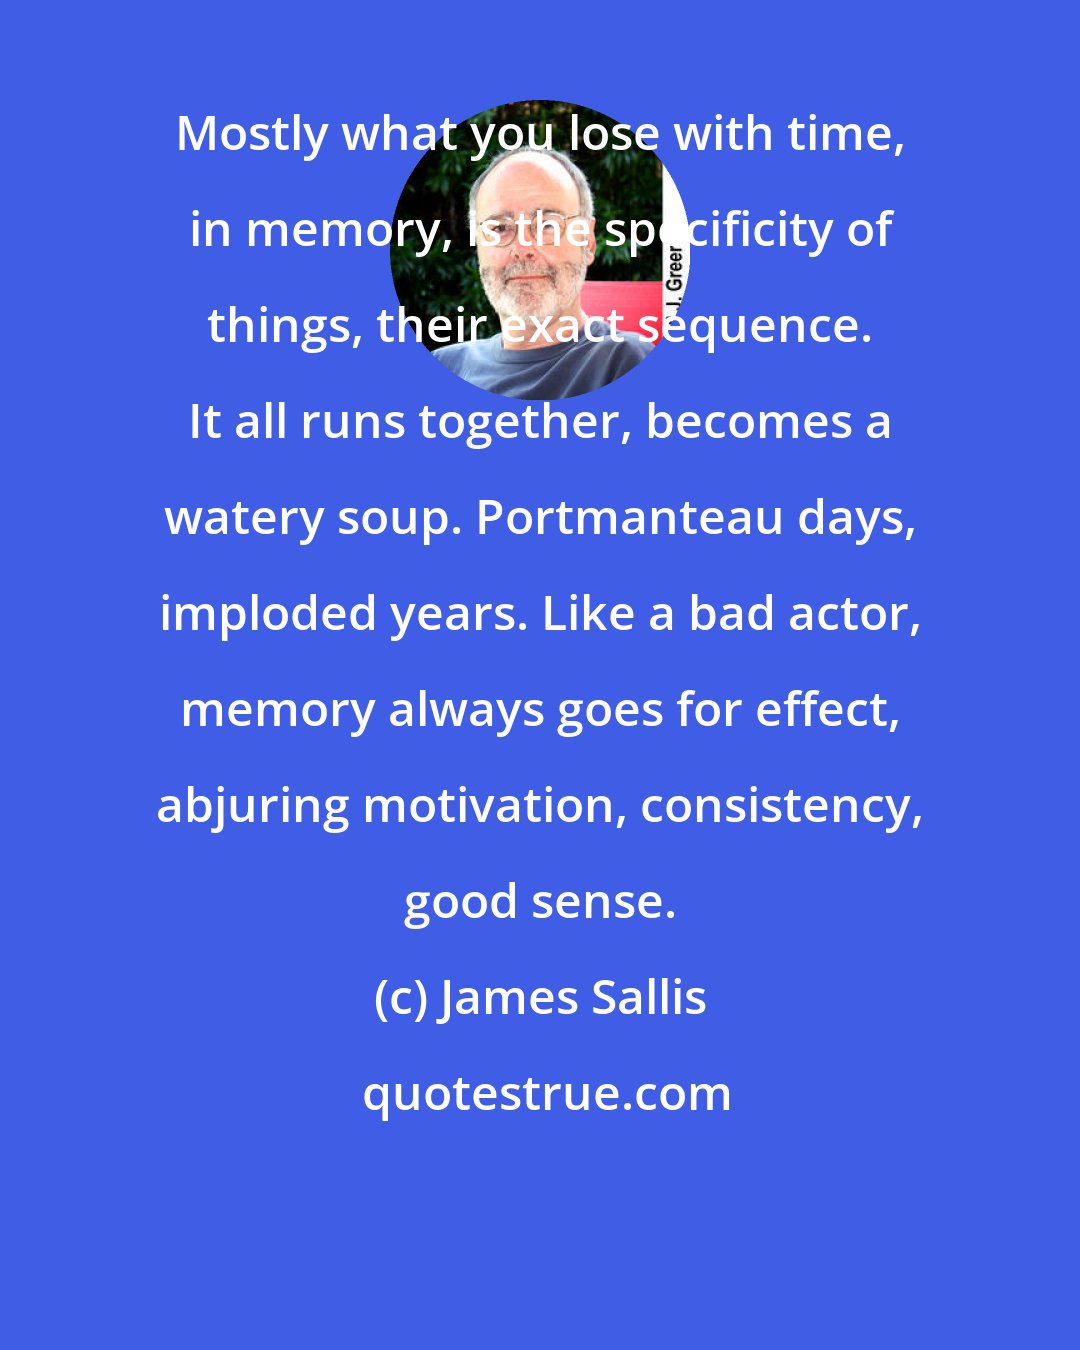 James Sallis: Mostly what you lose with time, in memory, is the specificity of things, their exact sequence. It all runs together, becomes a watery soup. Portmanteau days, imploded years. Like a bad actor, memory always goes for effect, abjuring motivation, consistency, good sense.